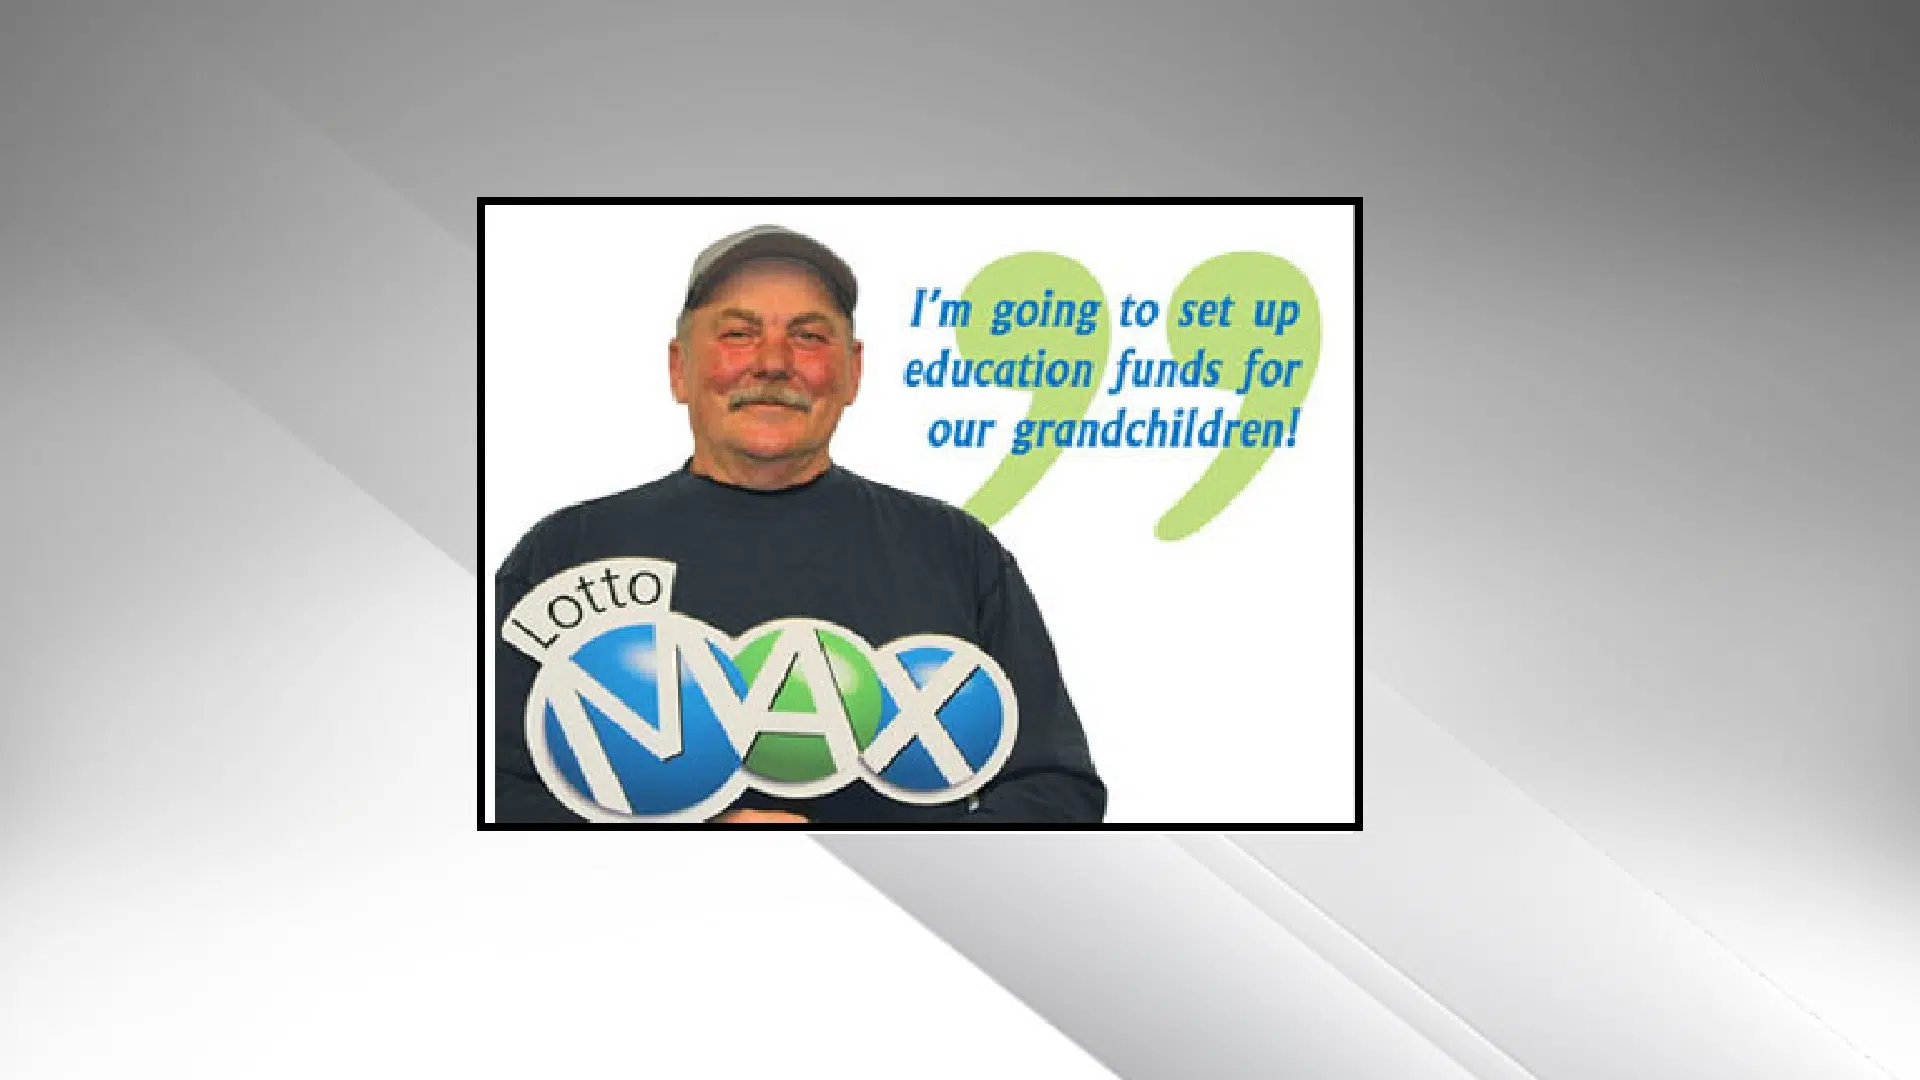 western lottery corporation lotto max